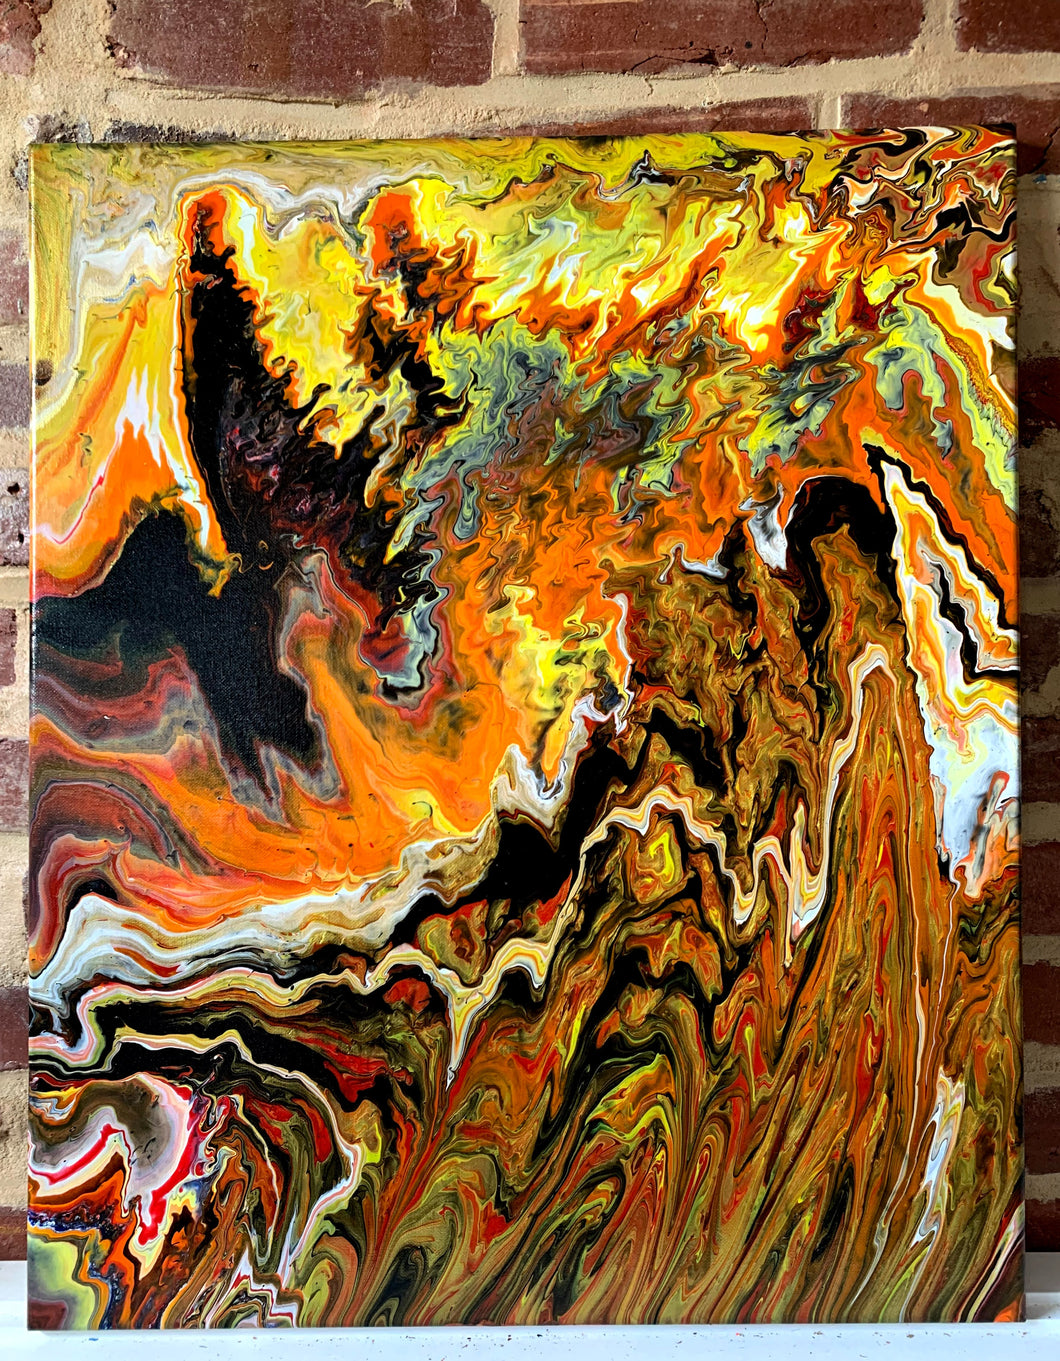 Flames of Passion - 20x24